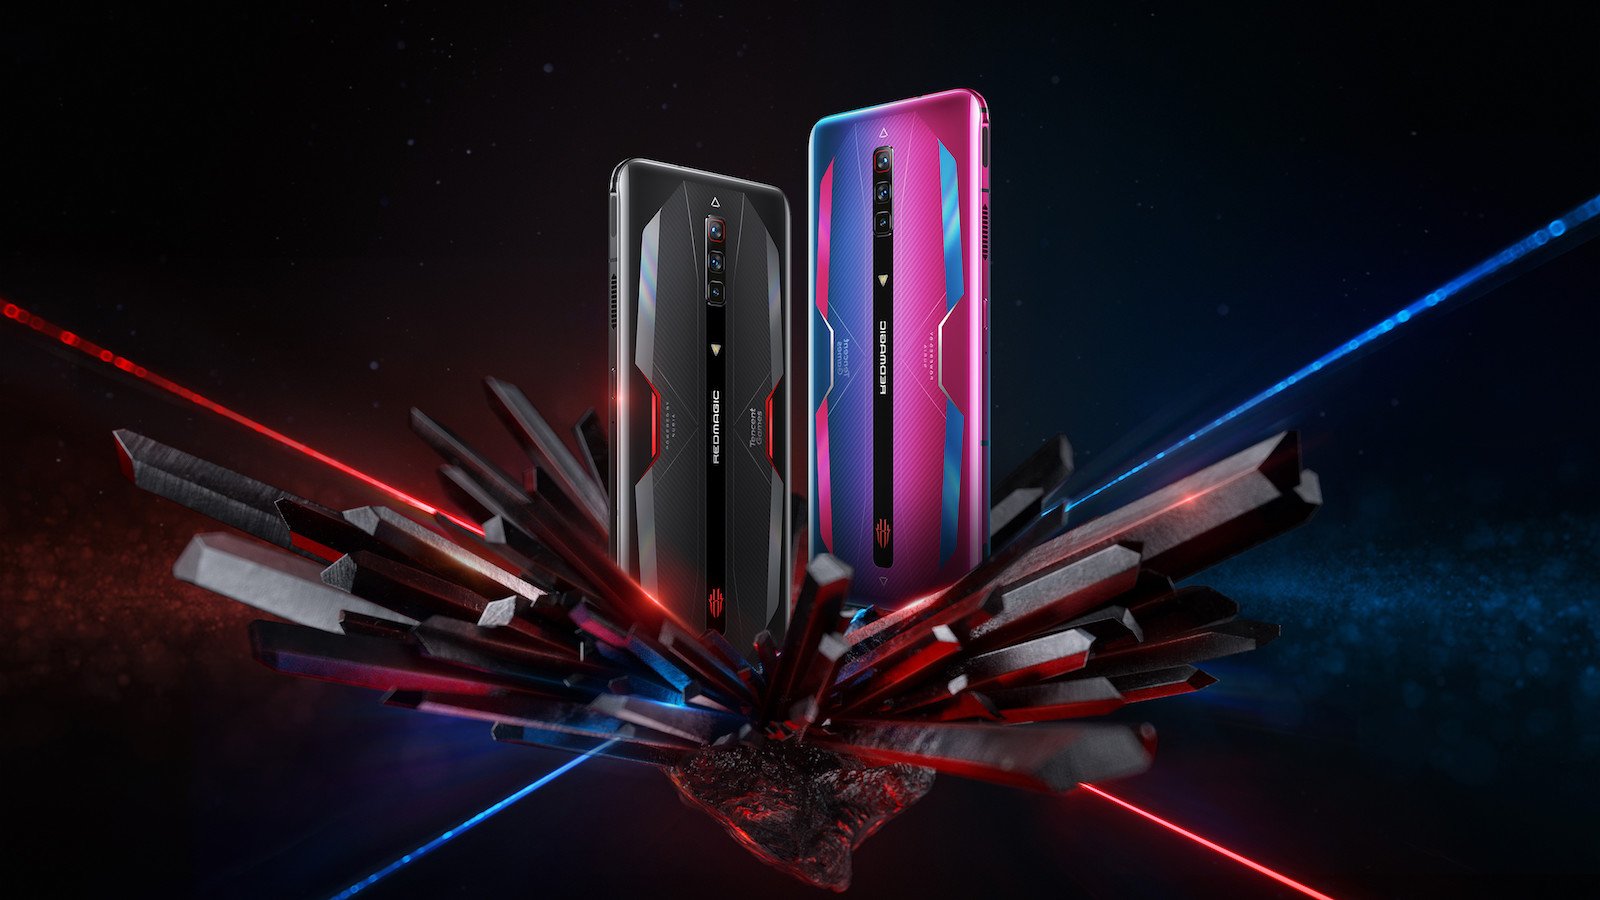 RedMagic 6 Series gaming phones feature a screen with a 165 Hz refresh rate